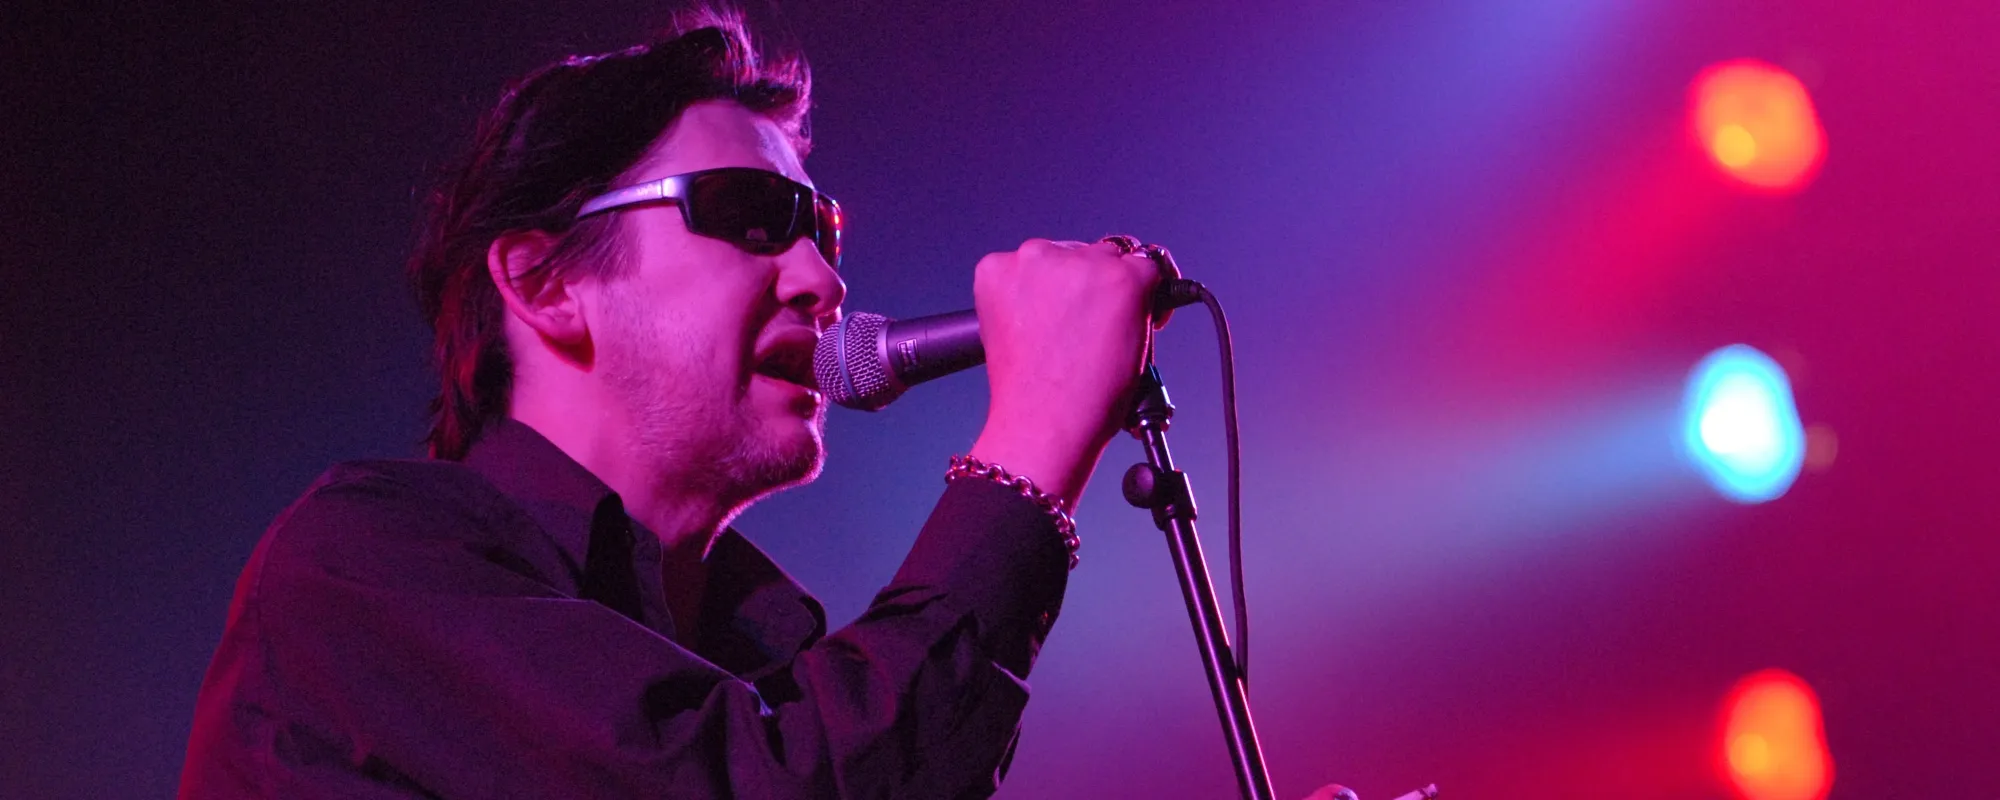 Shane MacGowan’s Last Requests Included Leaving €10,000 Behind His Favorite Bar for His Wake